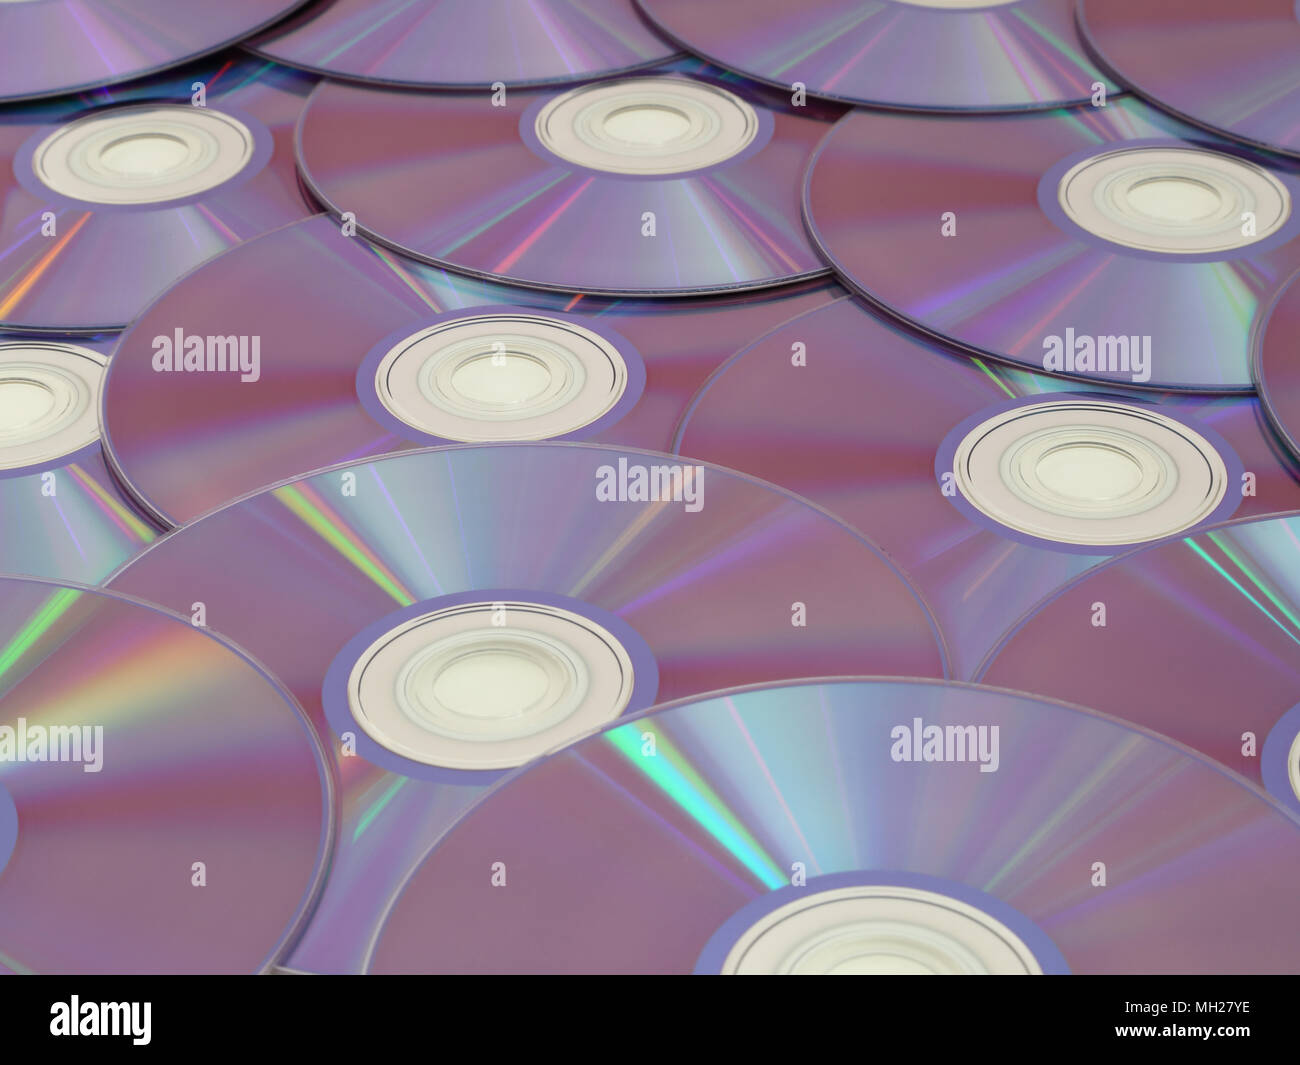 Blank DVDs are on display with the reflective side facing up. Stock Photo